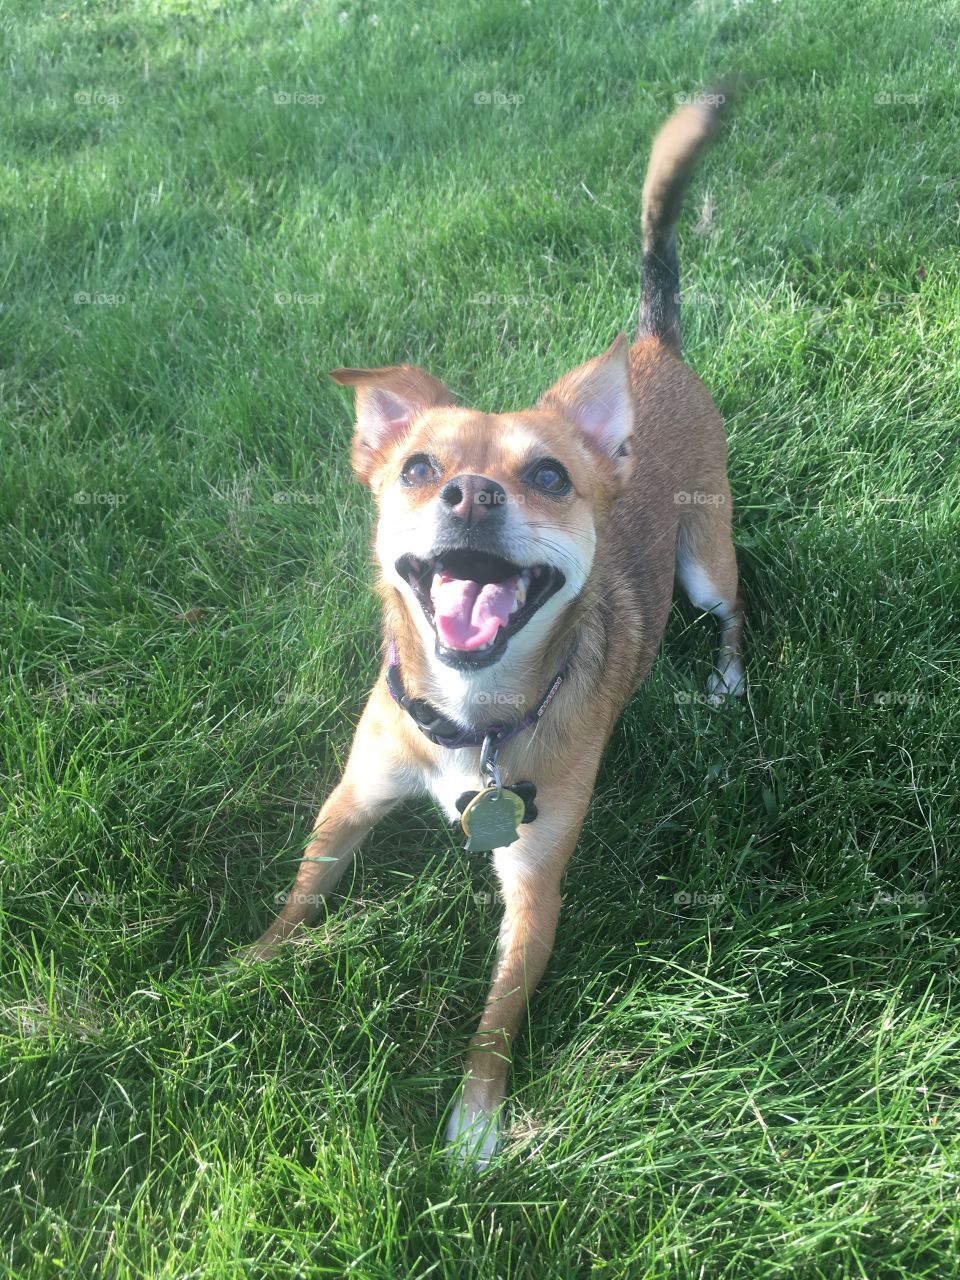 "Throw the ball, throw the ball." 
She loves to play fetch. Chihuahua/terrier mix. 